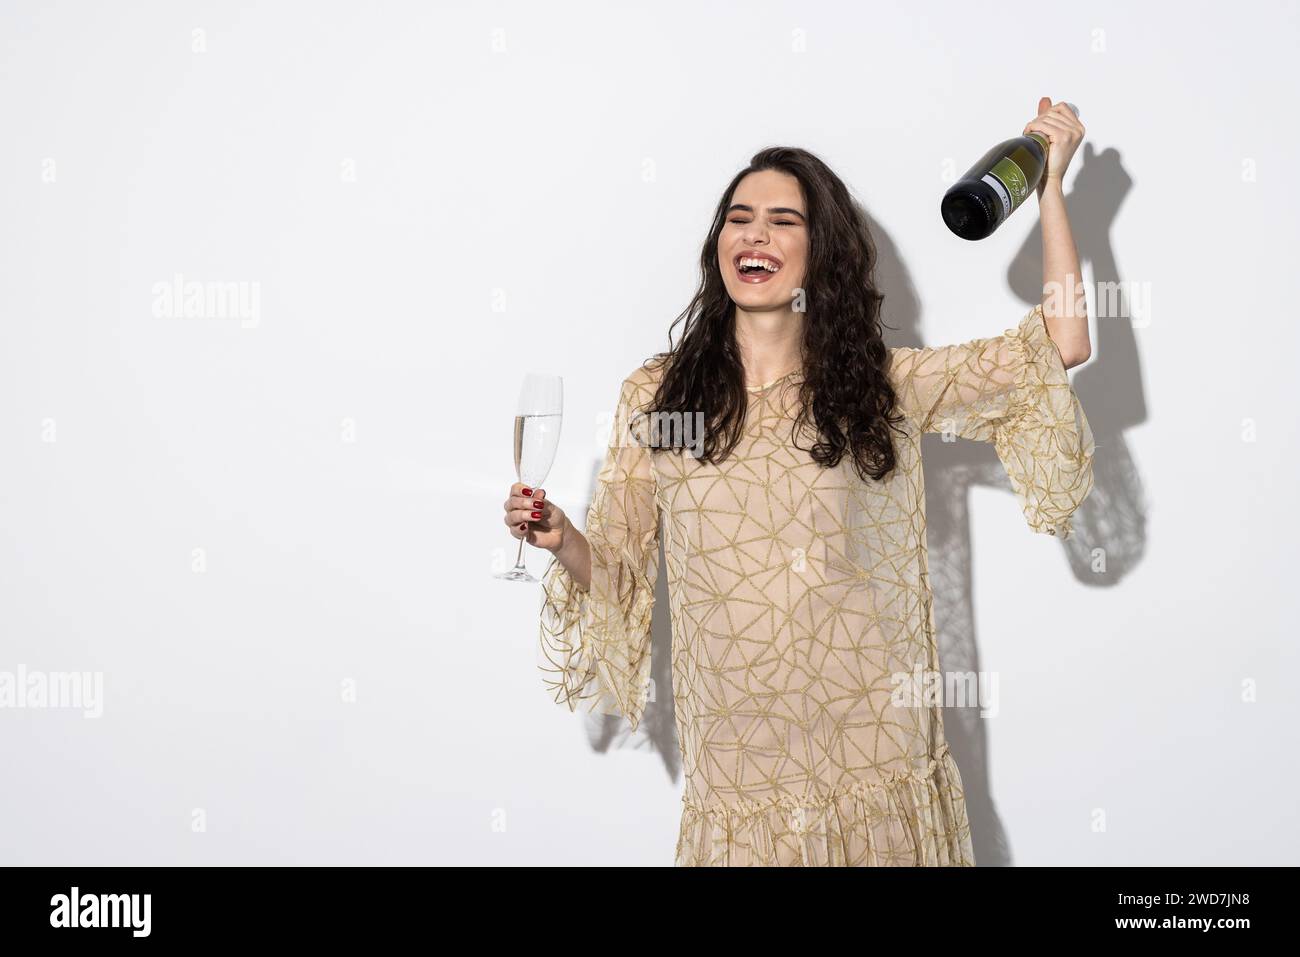 Woman in dress drinking champagne from bottle isolated on a white background Stock Photo